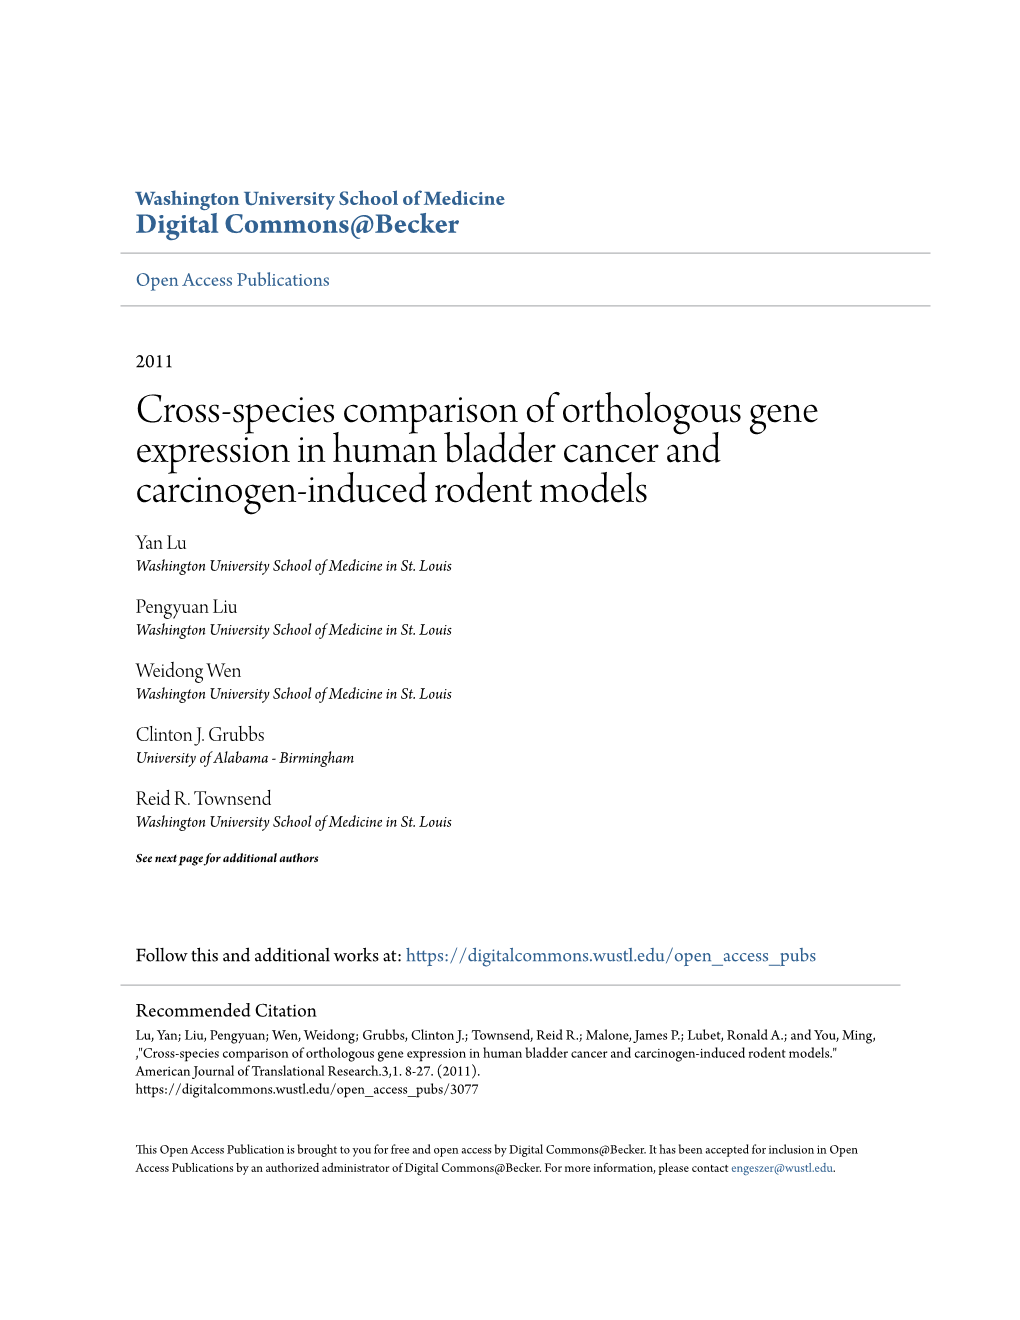 Cross-Species Comparison of Orthologous Gene Expression In